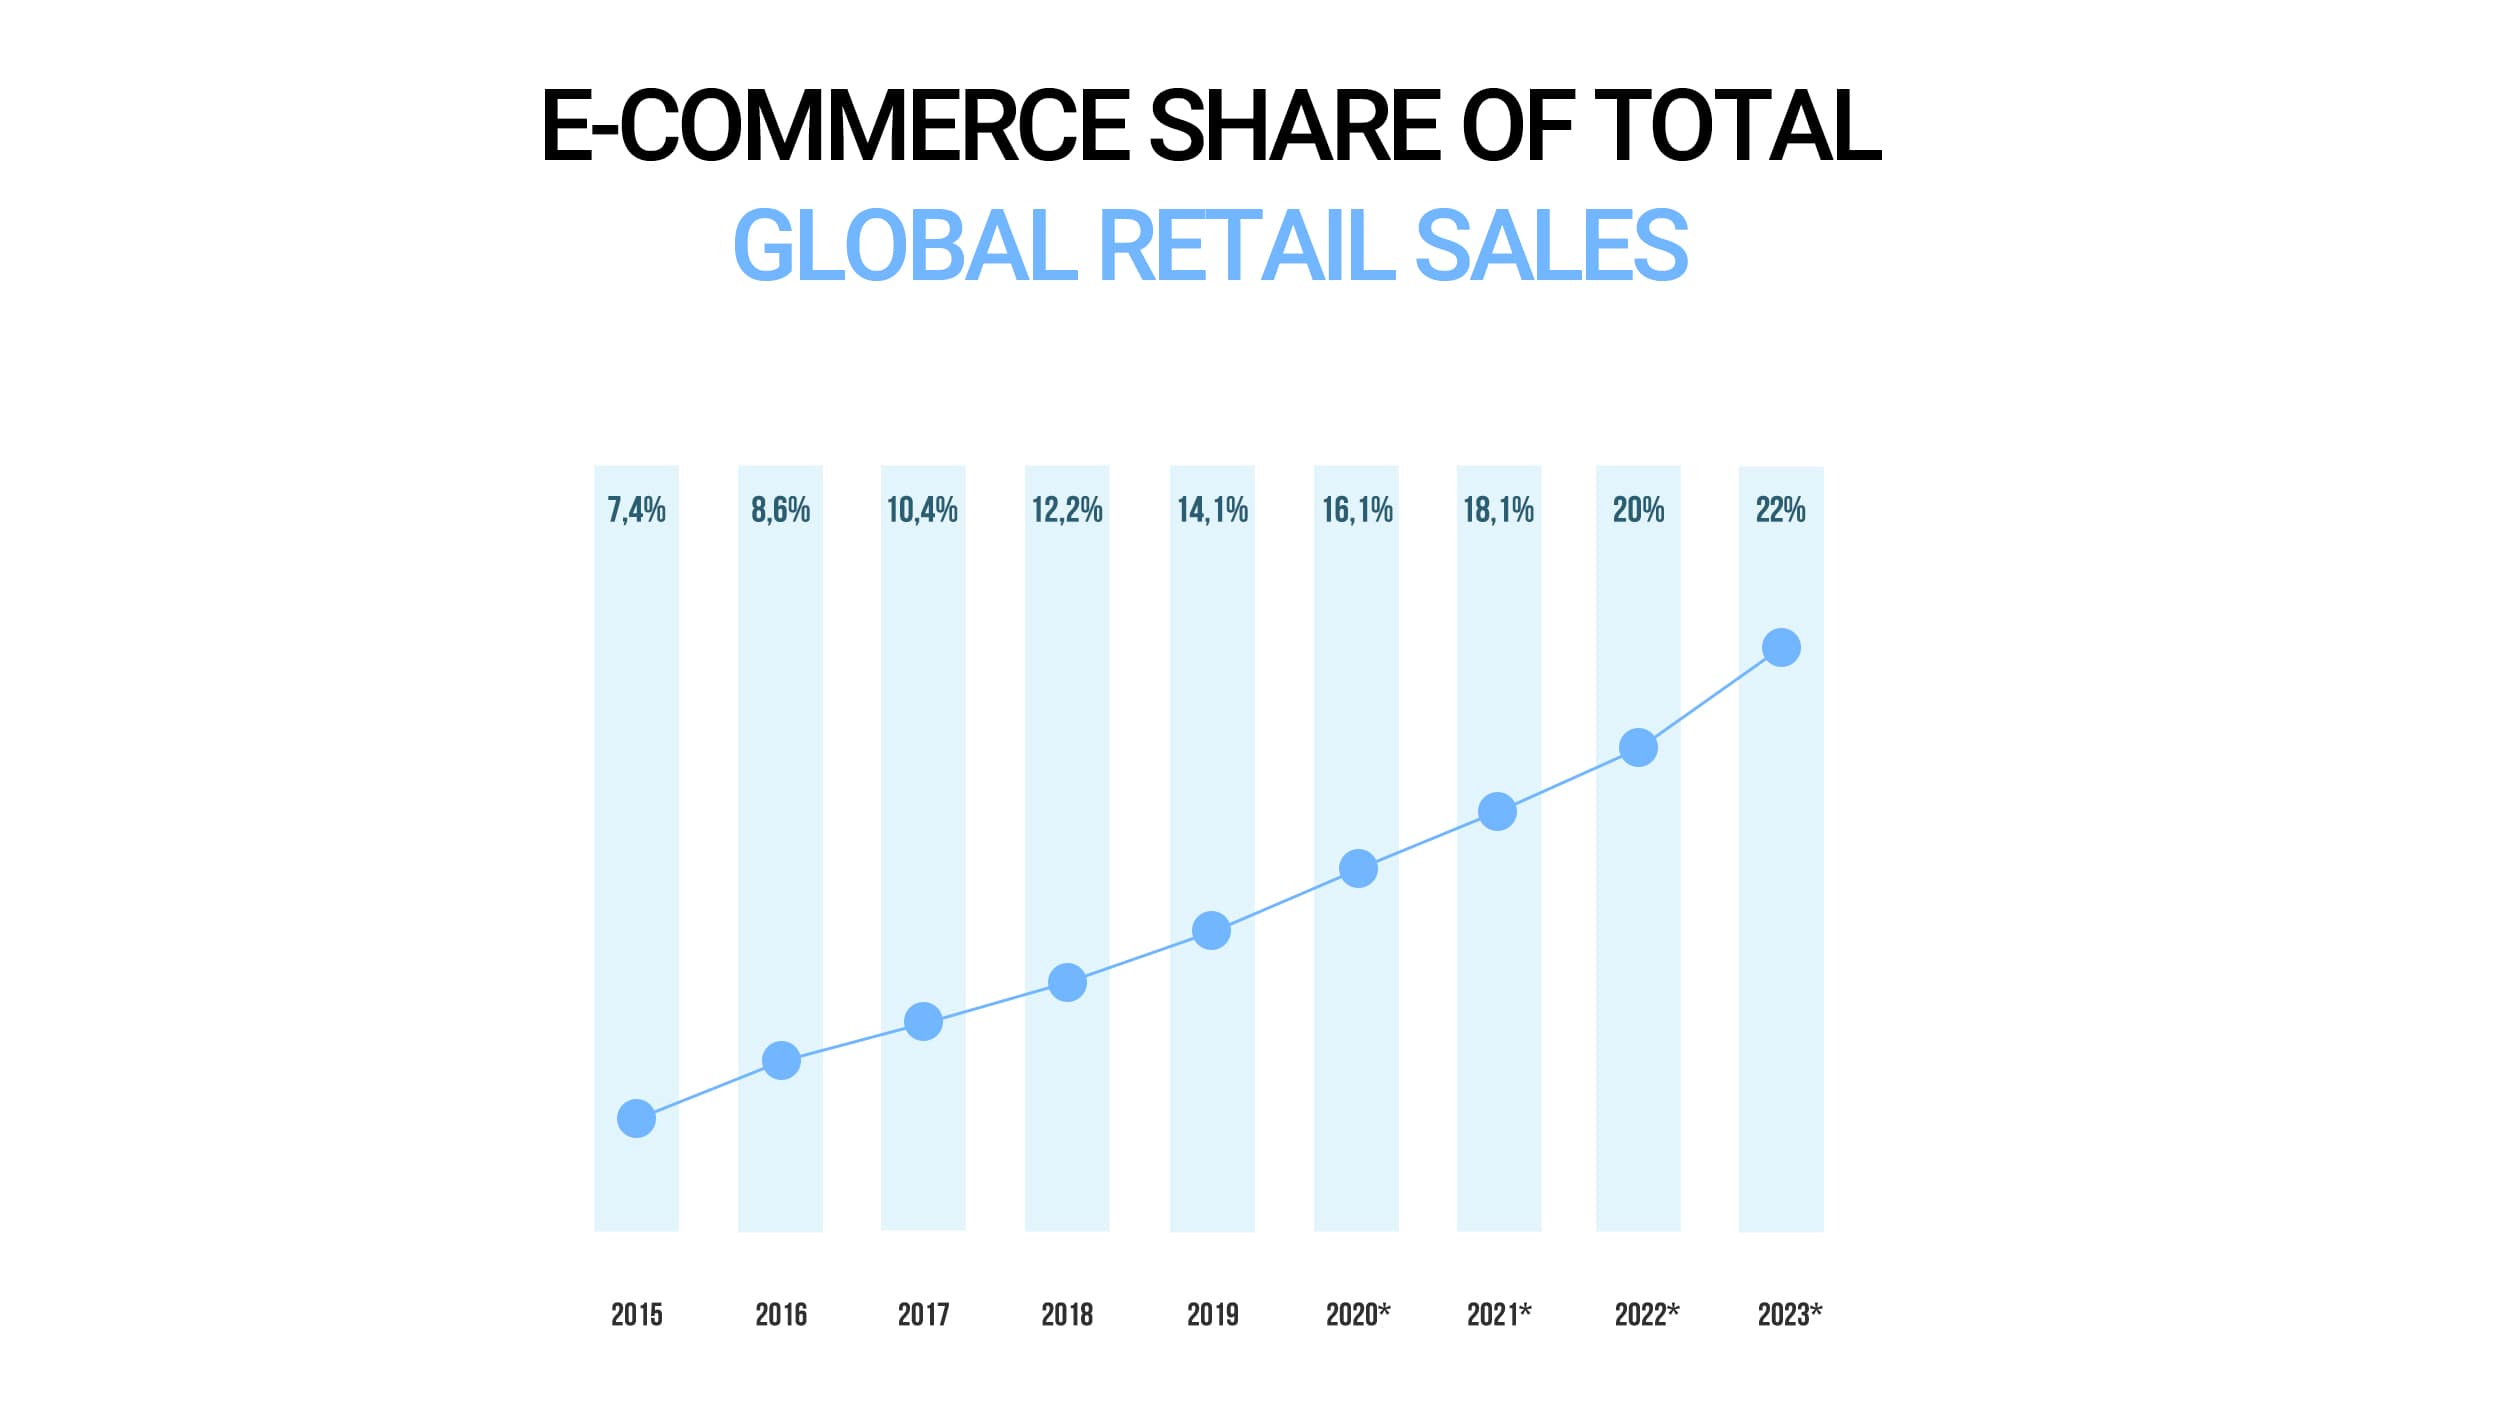 E-commerce share of total global retail sales from 2015 to 2023